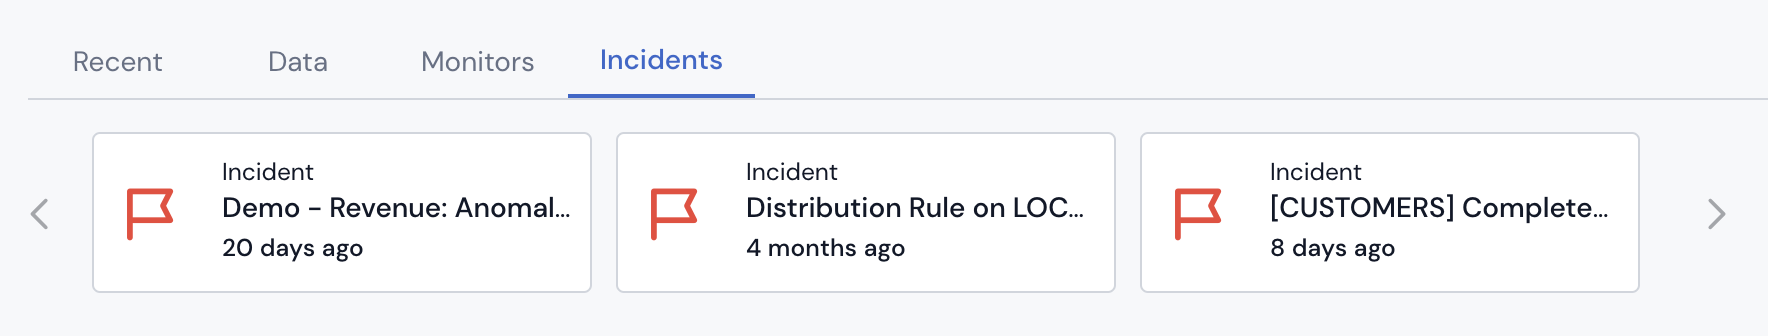 Dashboard "Pinned" Section -  "Incidents" Tab